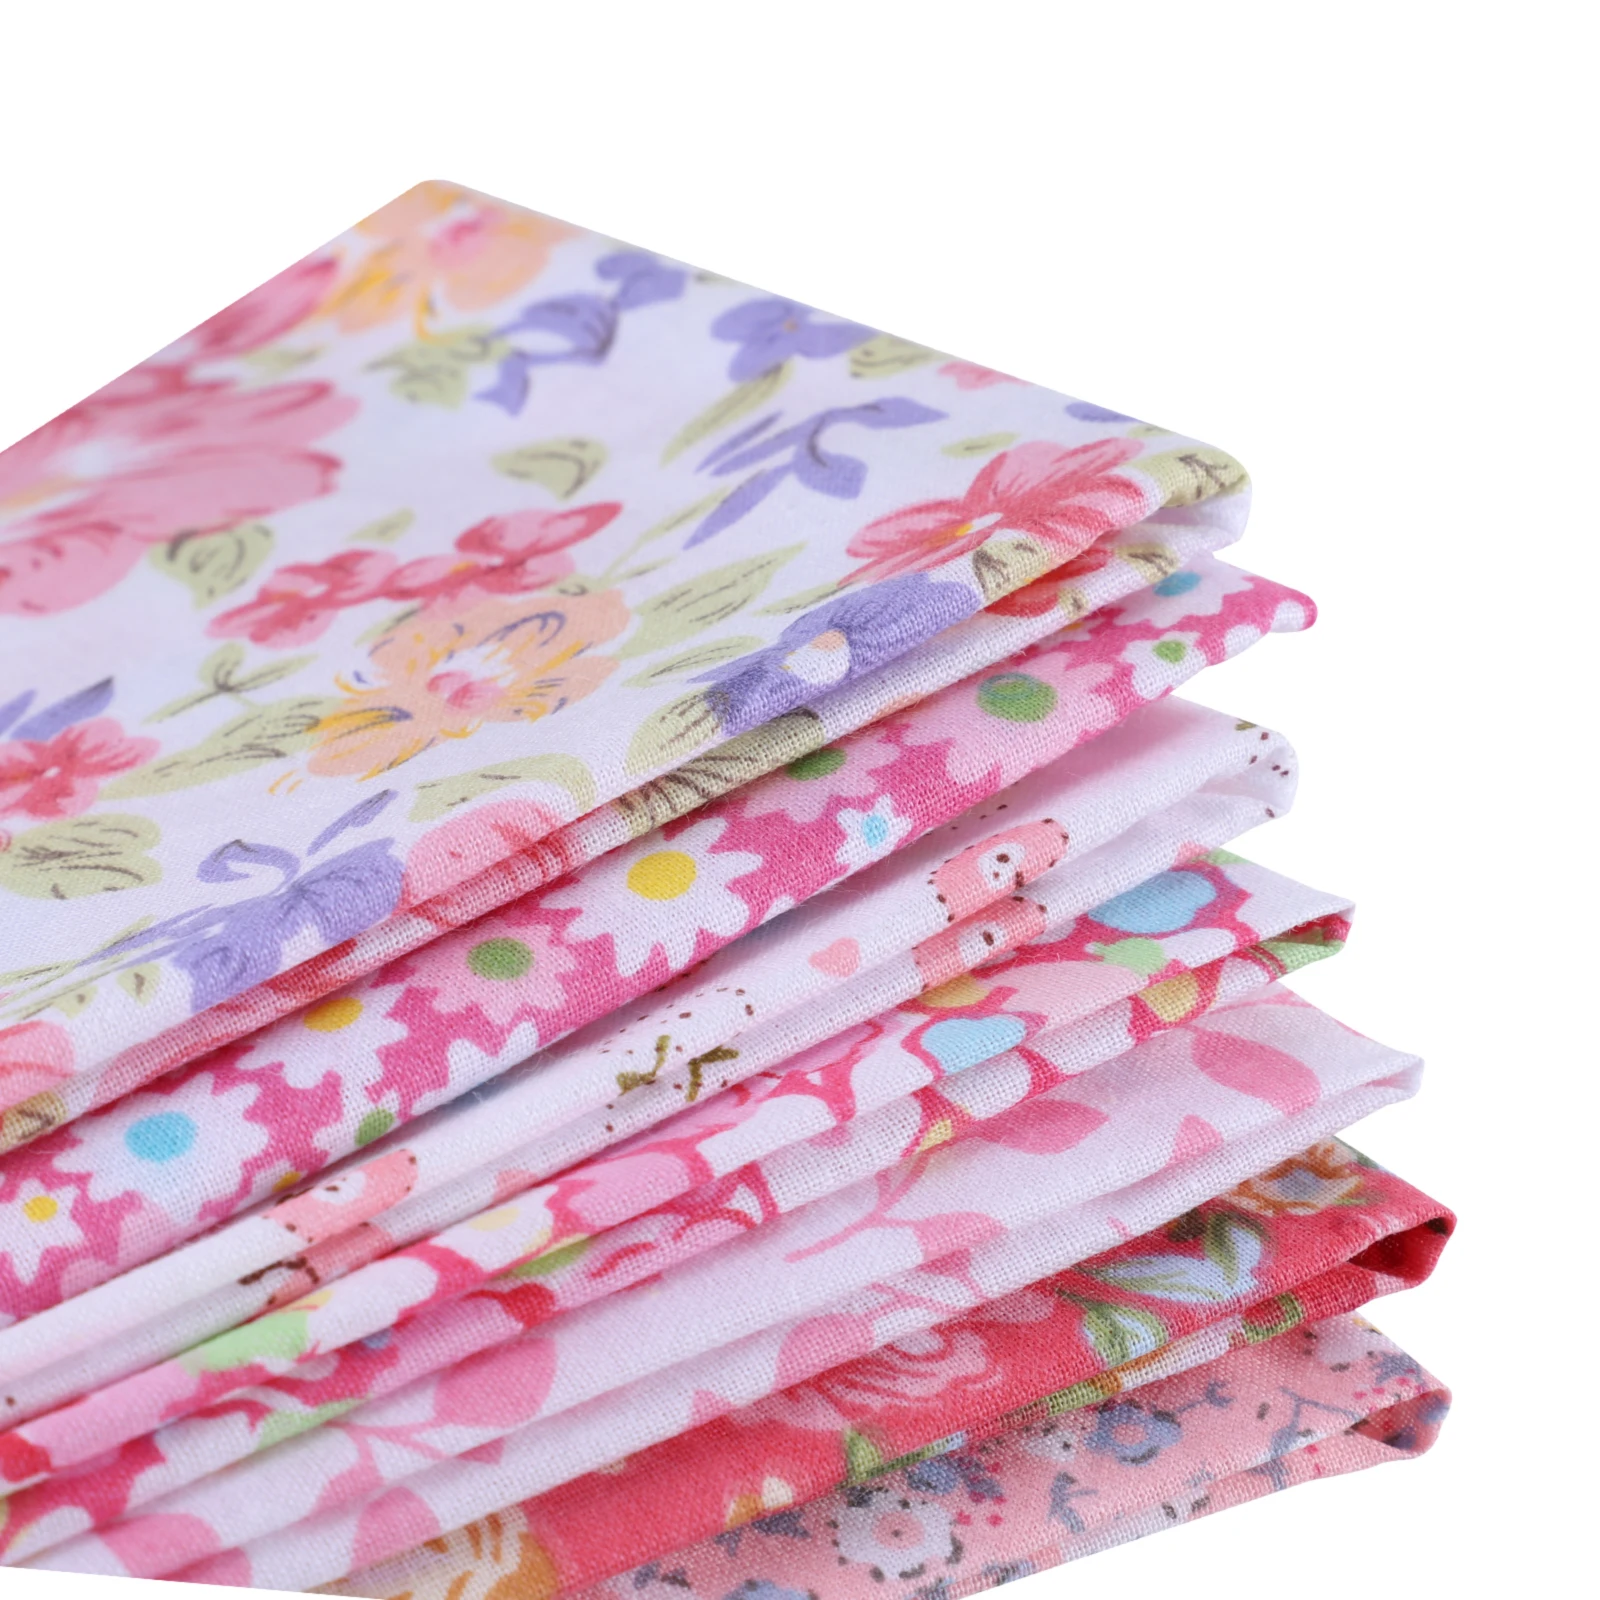 7 Pieces Flower Pattern Cotton Fabrics Sewing Floral Square Cloth Household Professional Patchwork Handmade 25x25cm